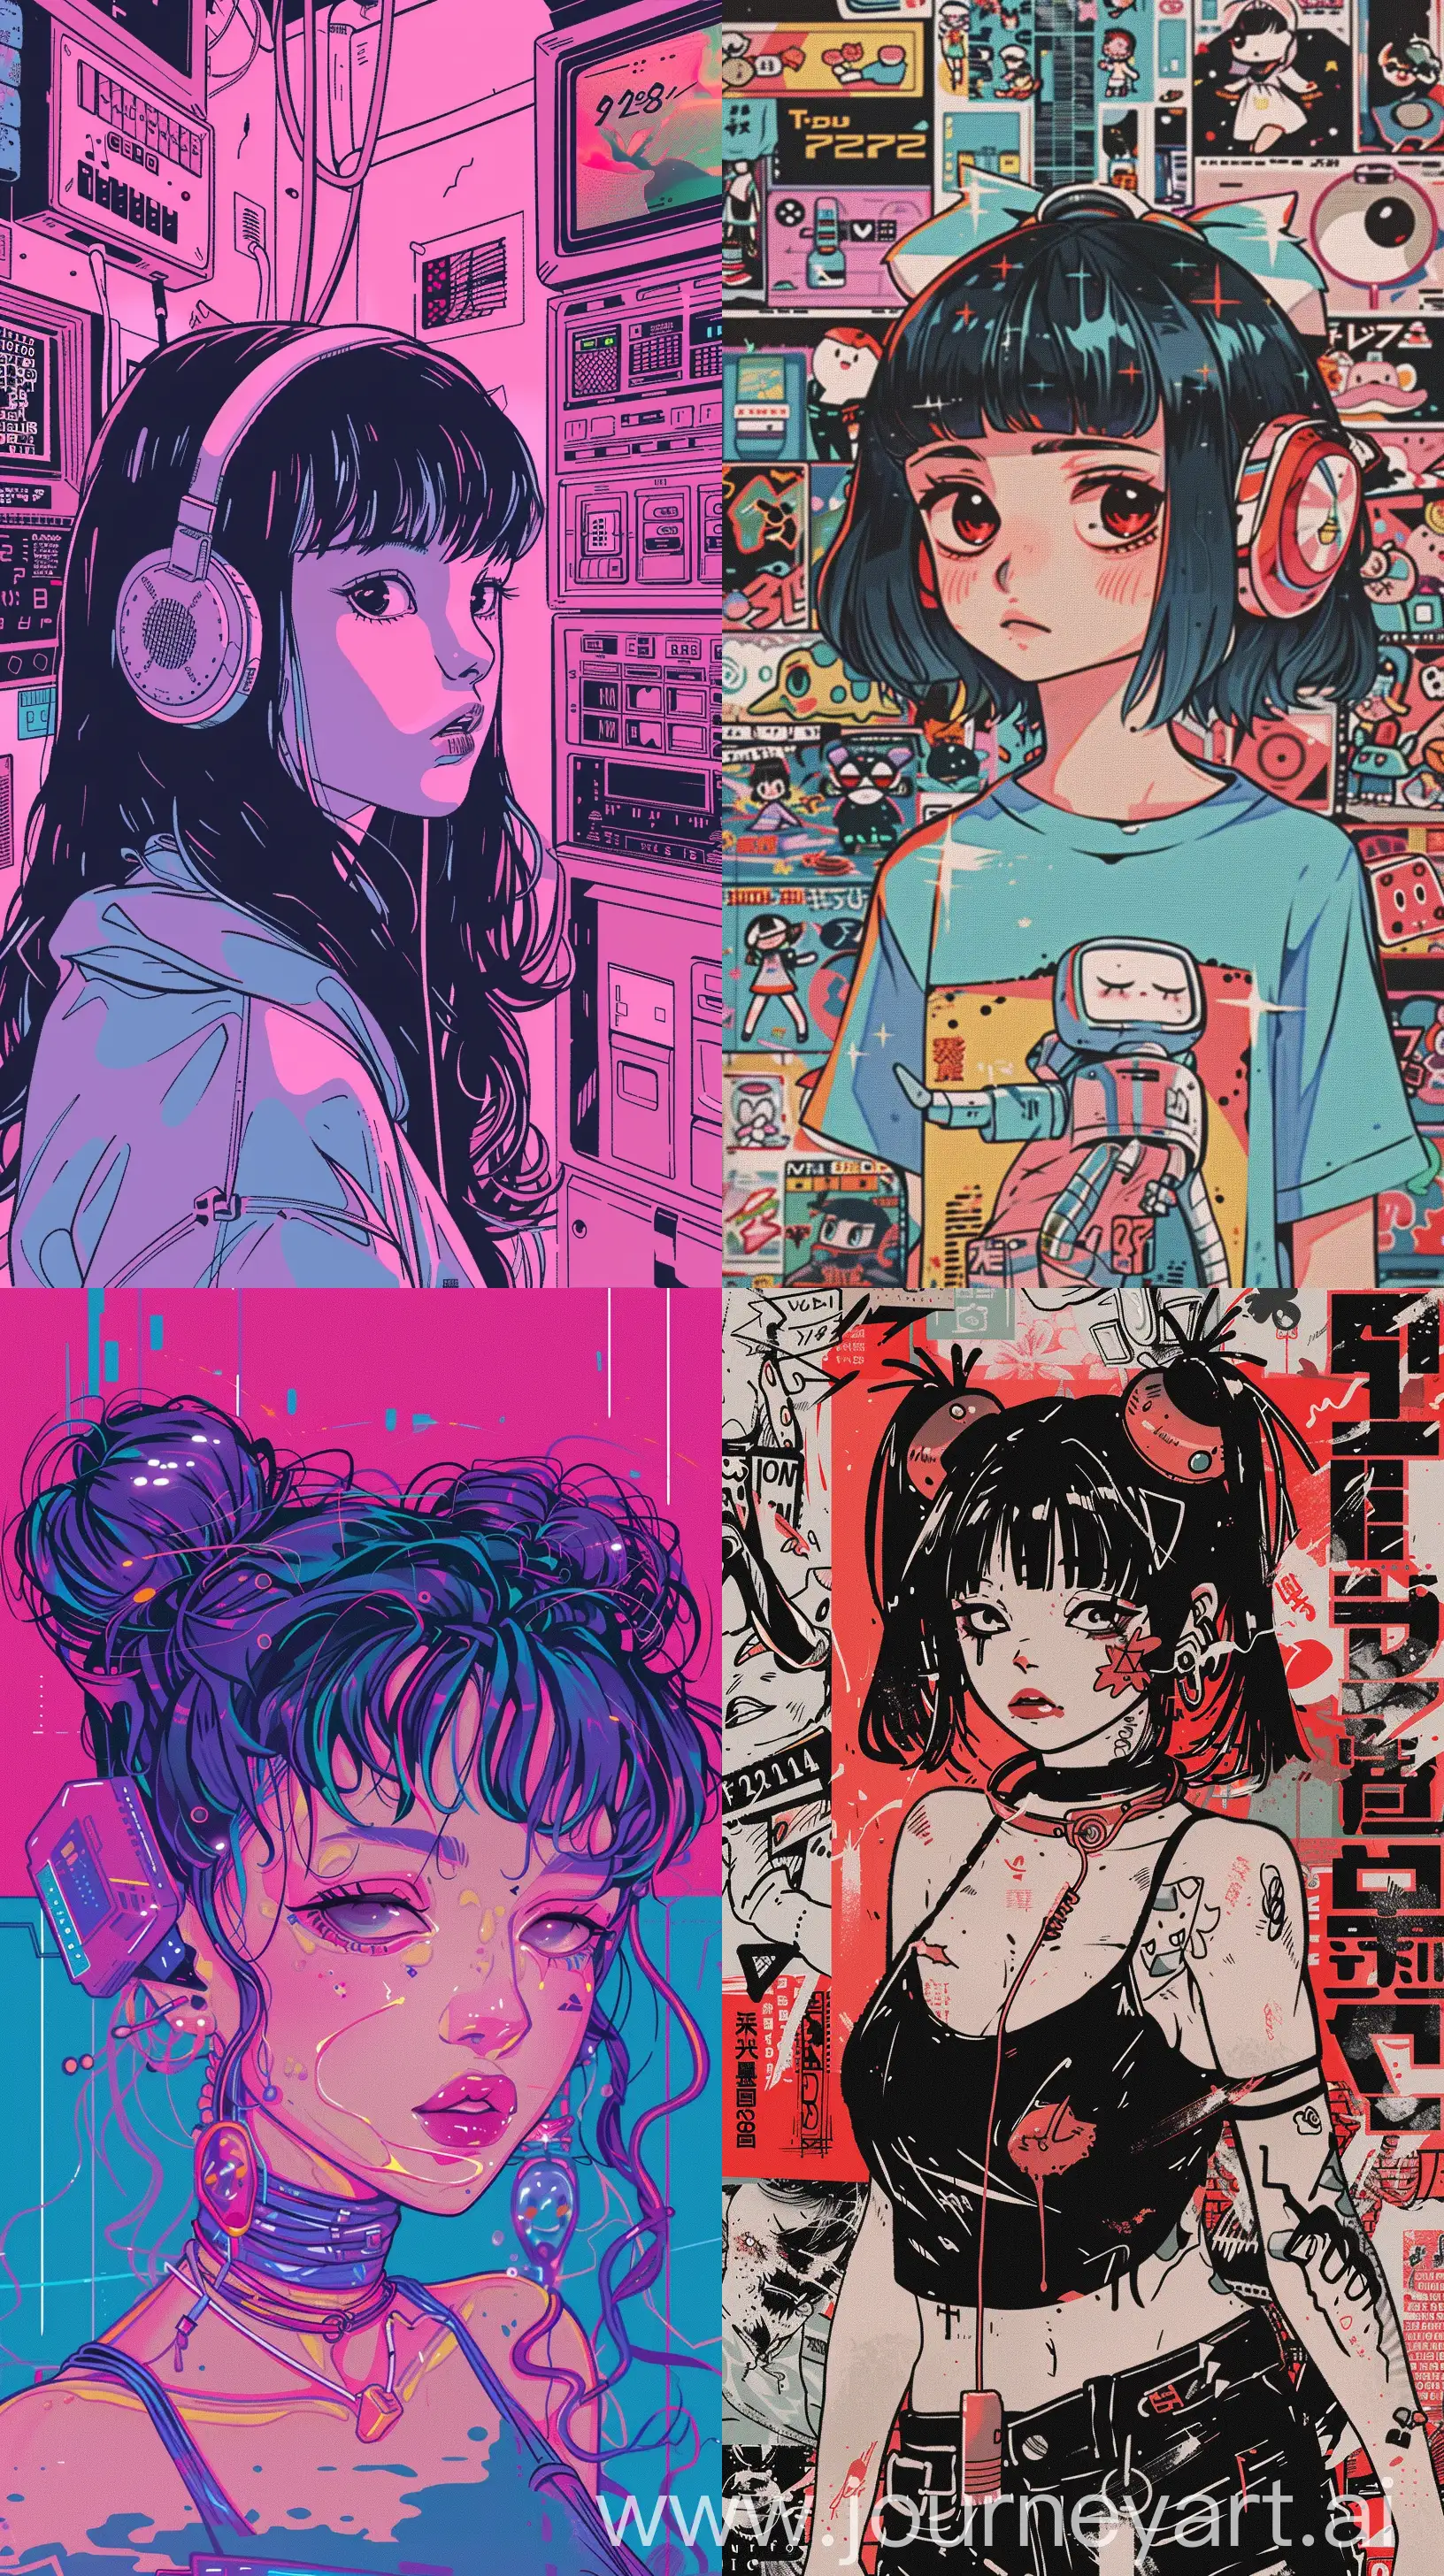 Aesthetic-Y2K-Anime-Sticker-Design-with-Vibrant-Colors-and-Nostalgic-Vibes